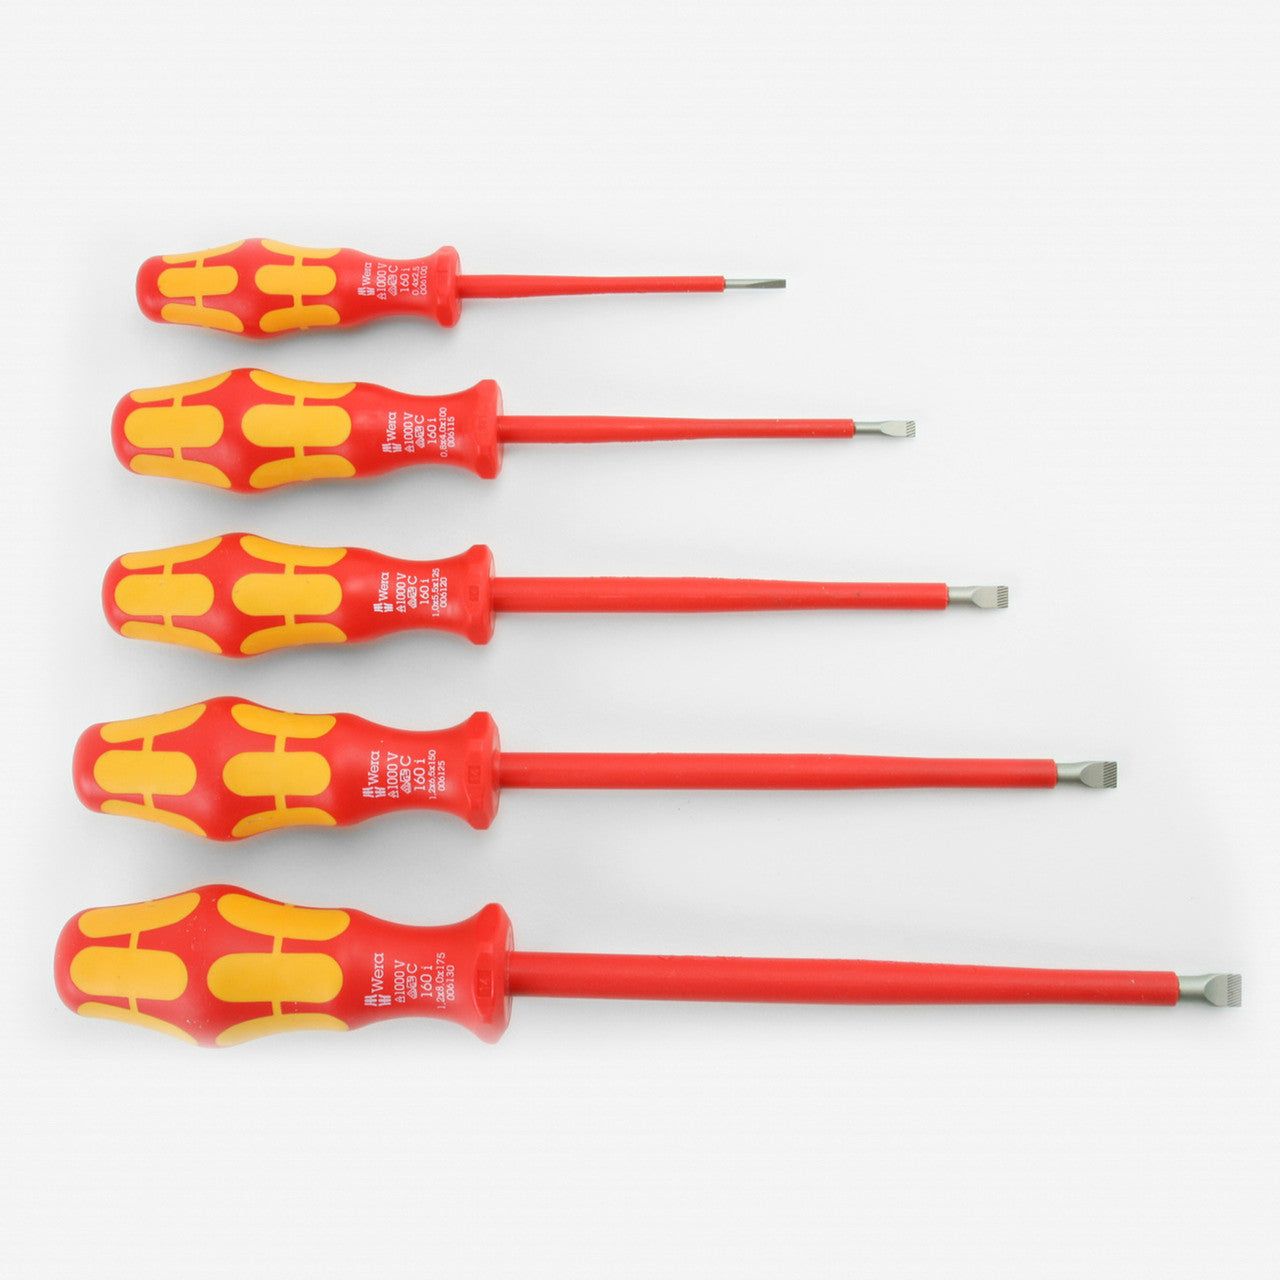 Wera 05346276001 VDE Insulated Slotted and Phillips Screwdriver Set